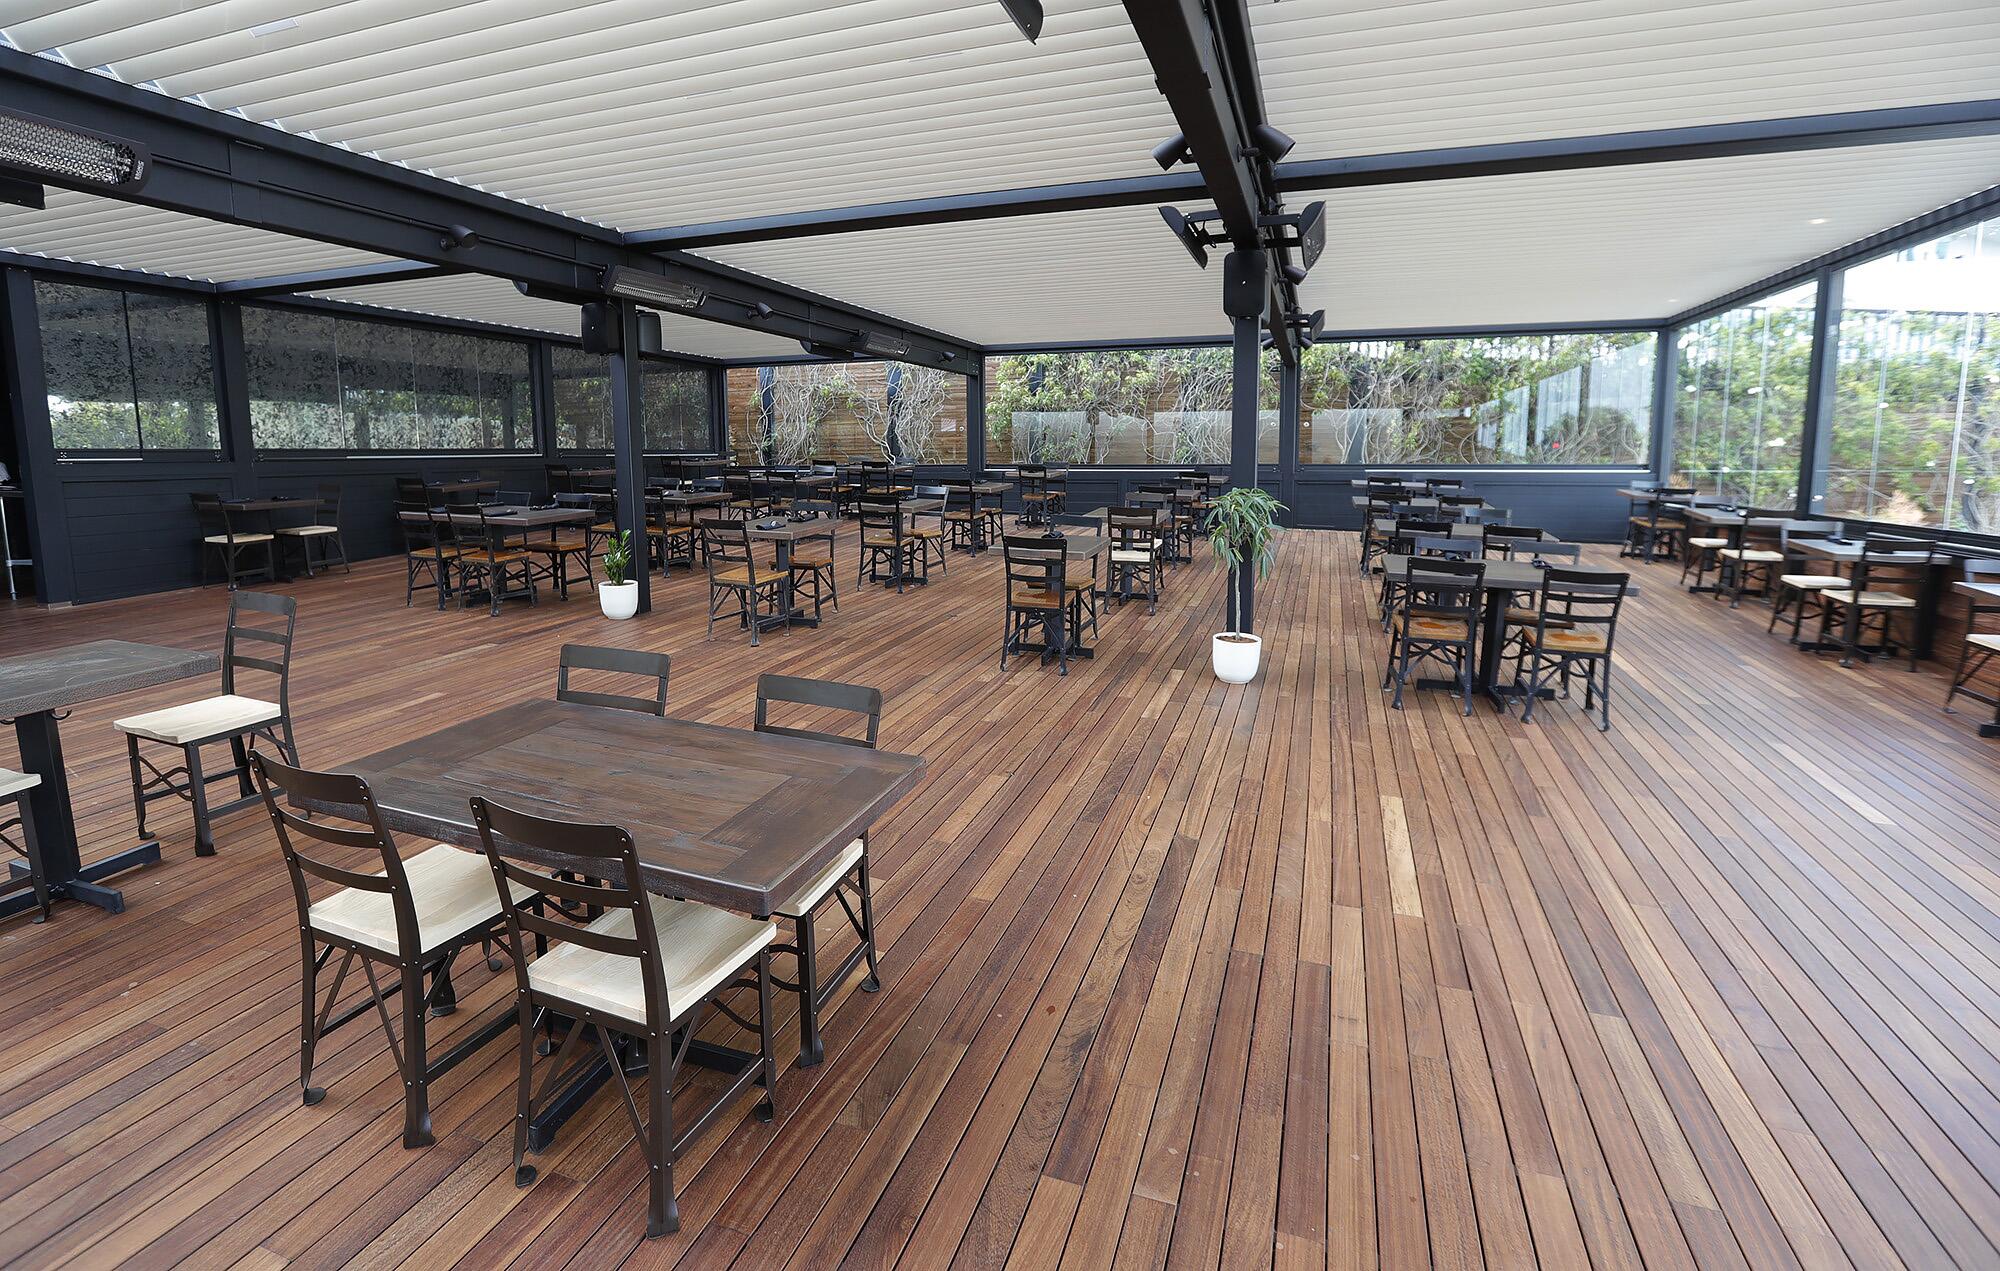 The outdoor patio dining room at the Craft House which debuted in Dana Point in April.